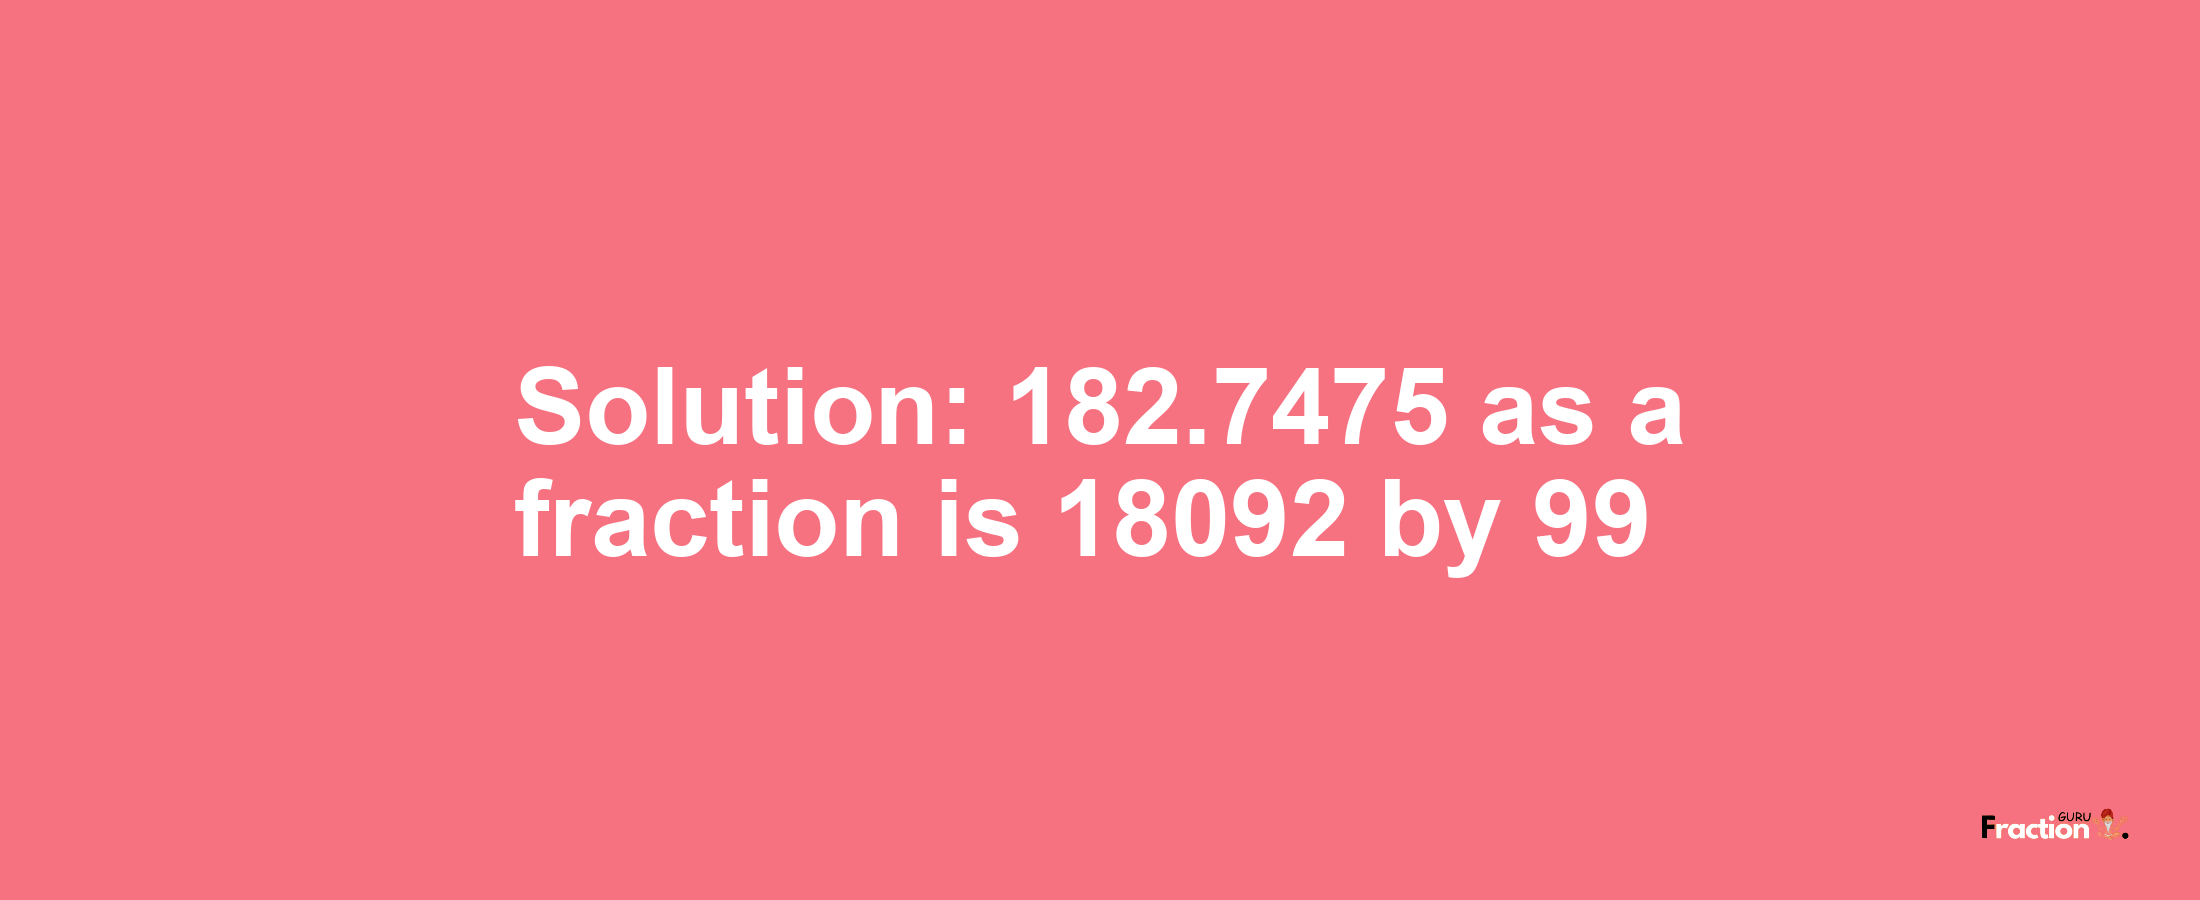 Solution:182.7475 as a fraction is 18092/99